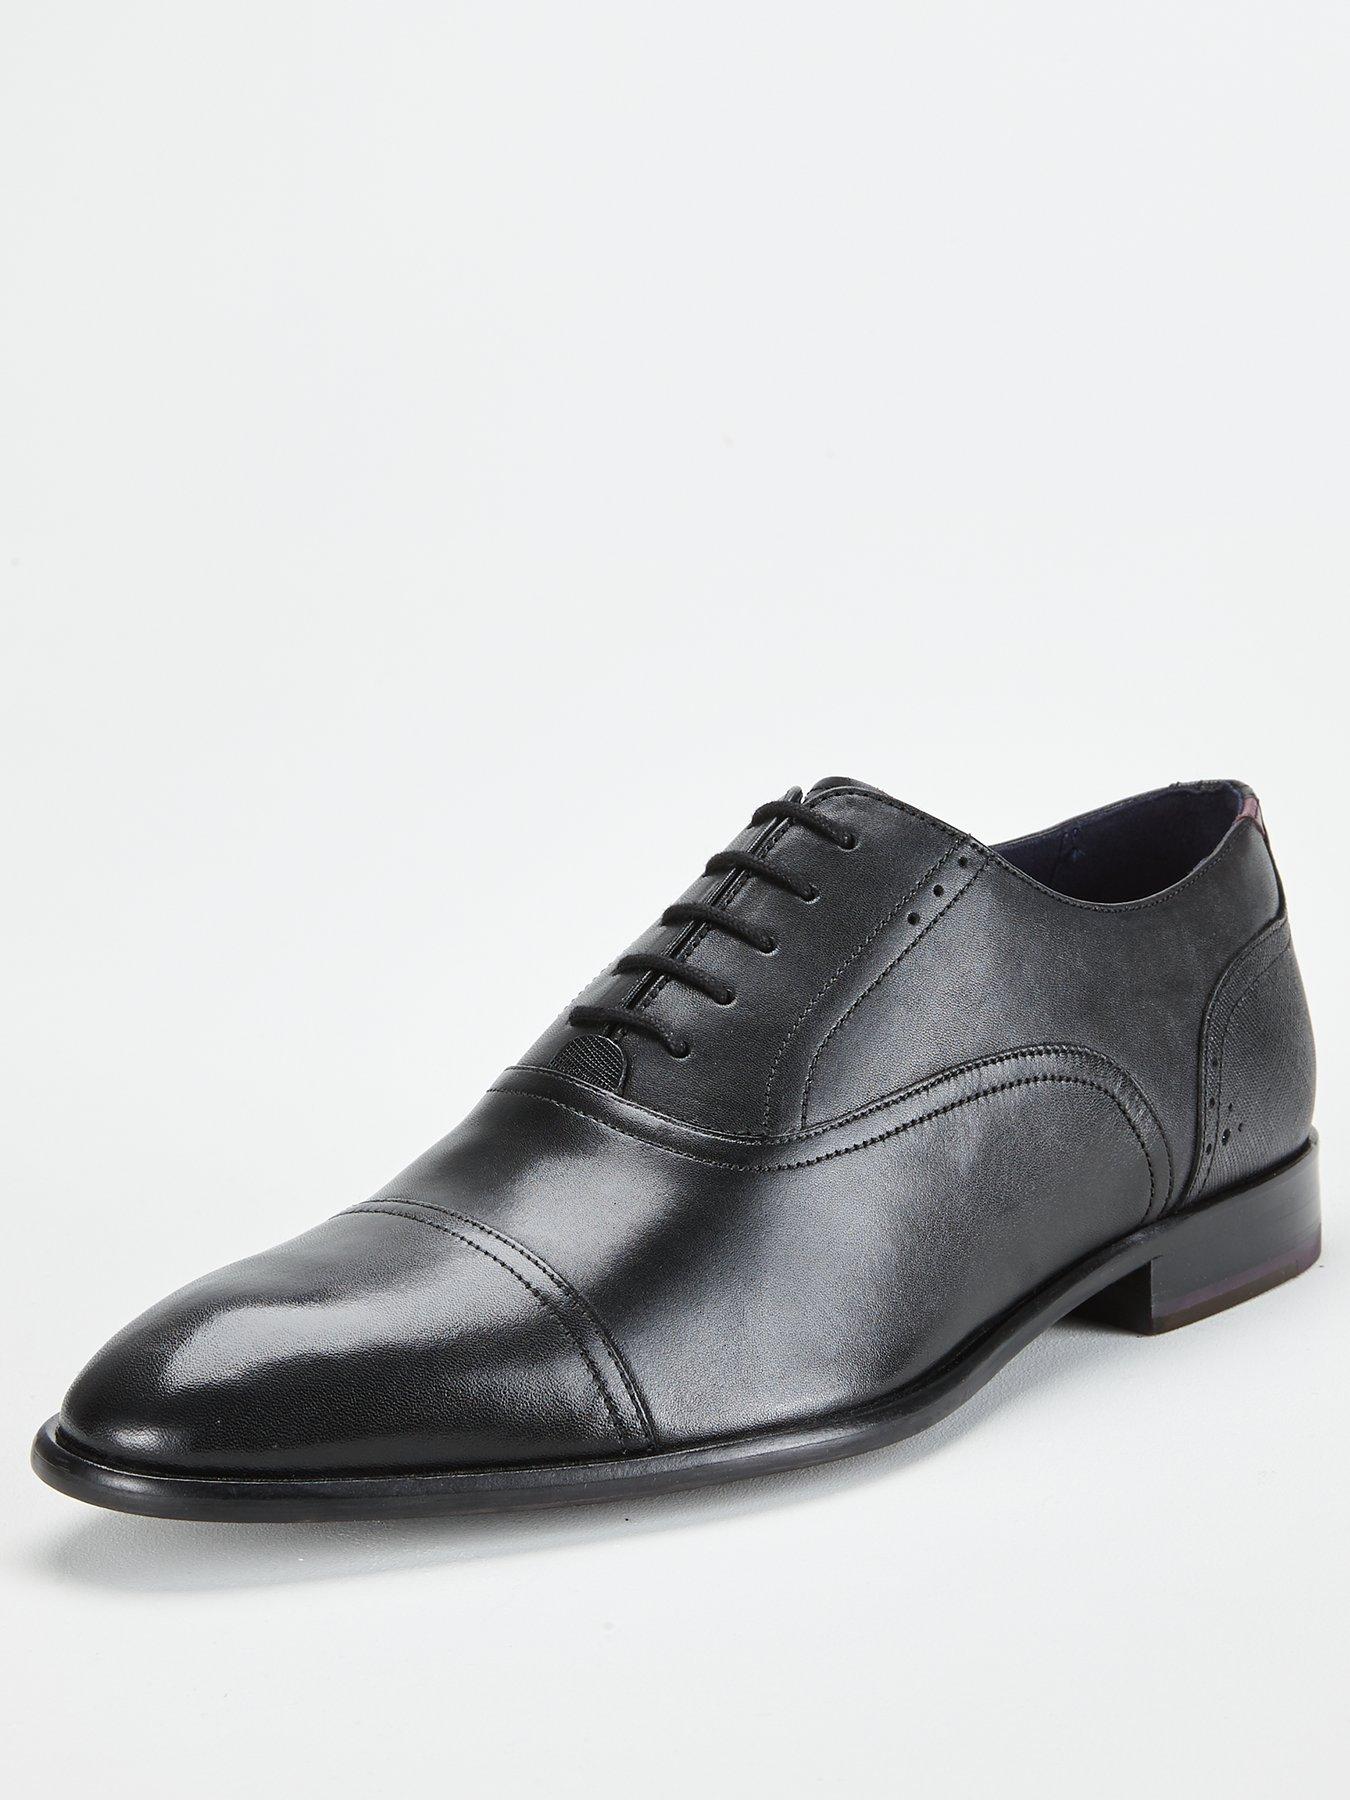 ted baker suit shoes